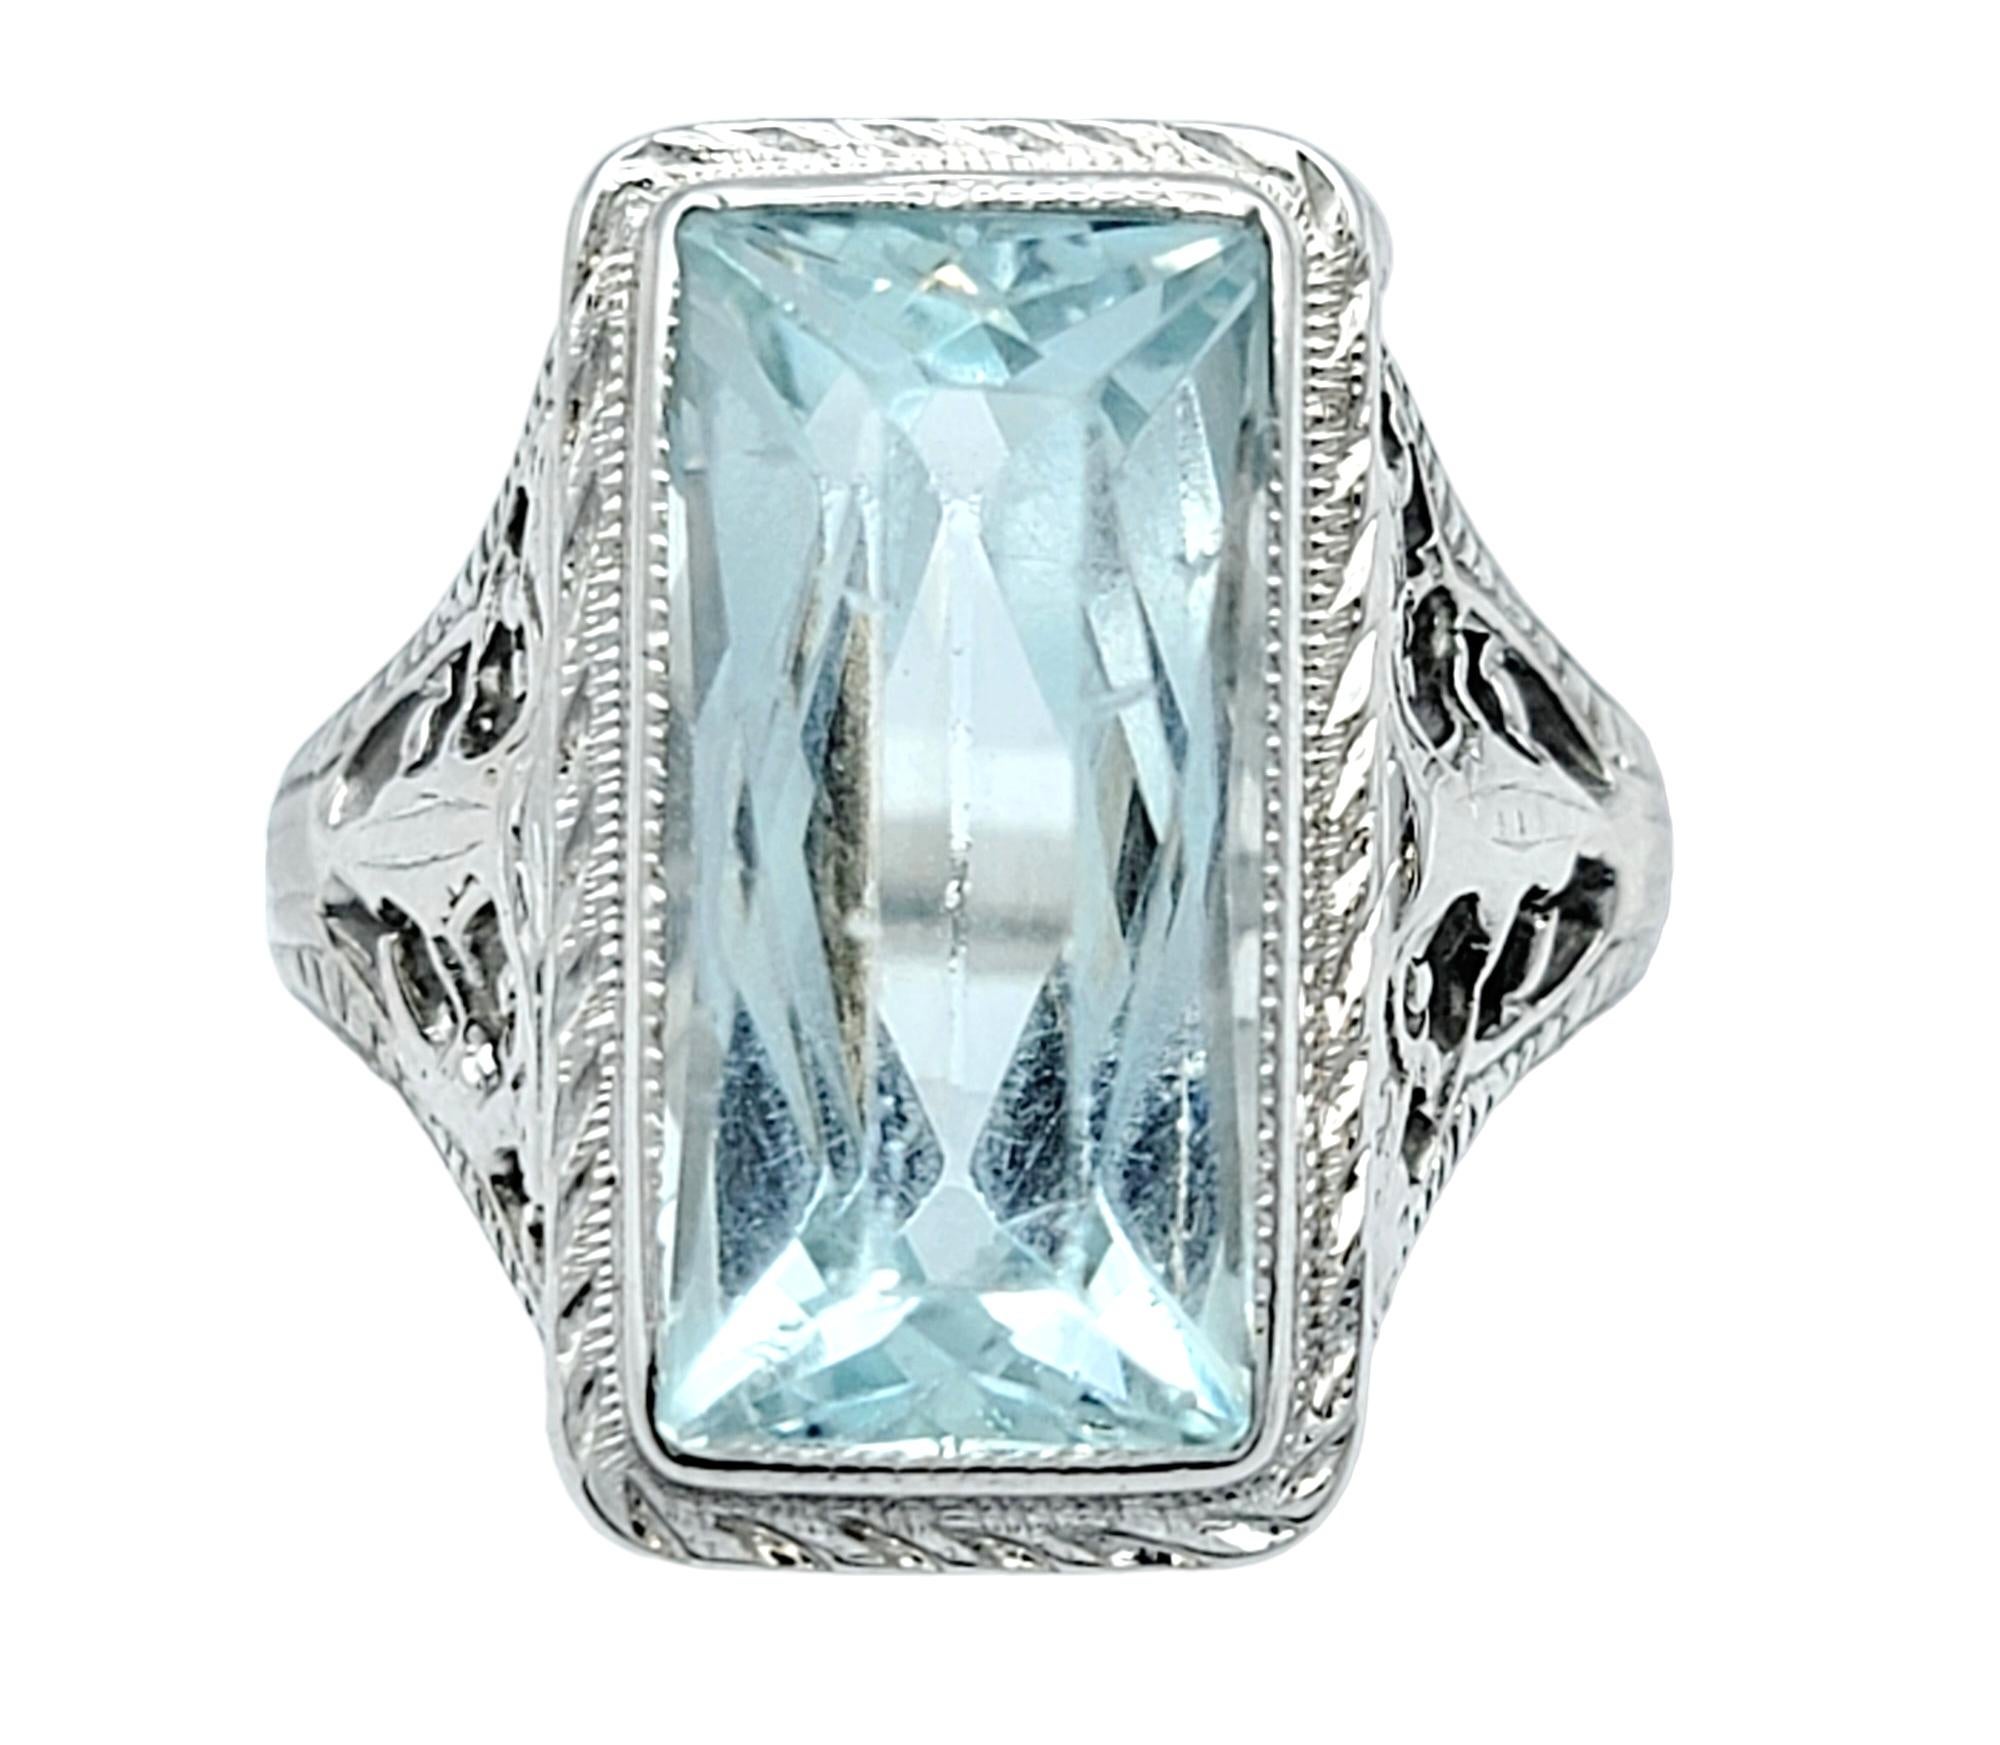 Ring Size: 6

This vintage cocktail ring, set in lustrous 18 karat white gold, is a true testament to timeless elegance and sophisticated design. At its heart lies a mesmerizing 4-carat baguette-cut aquamarine gemstone, beautifully bezel-set. The